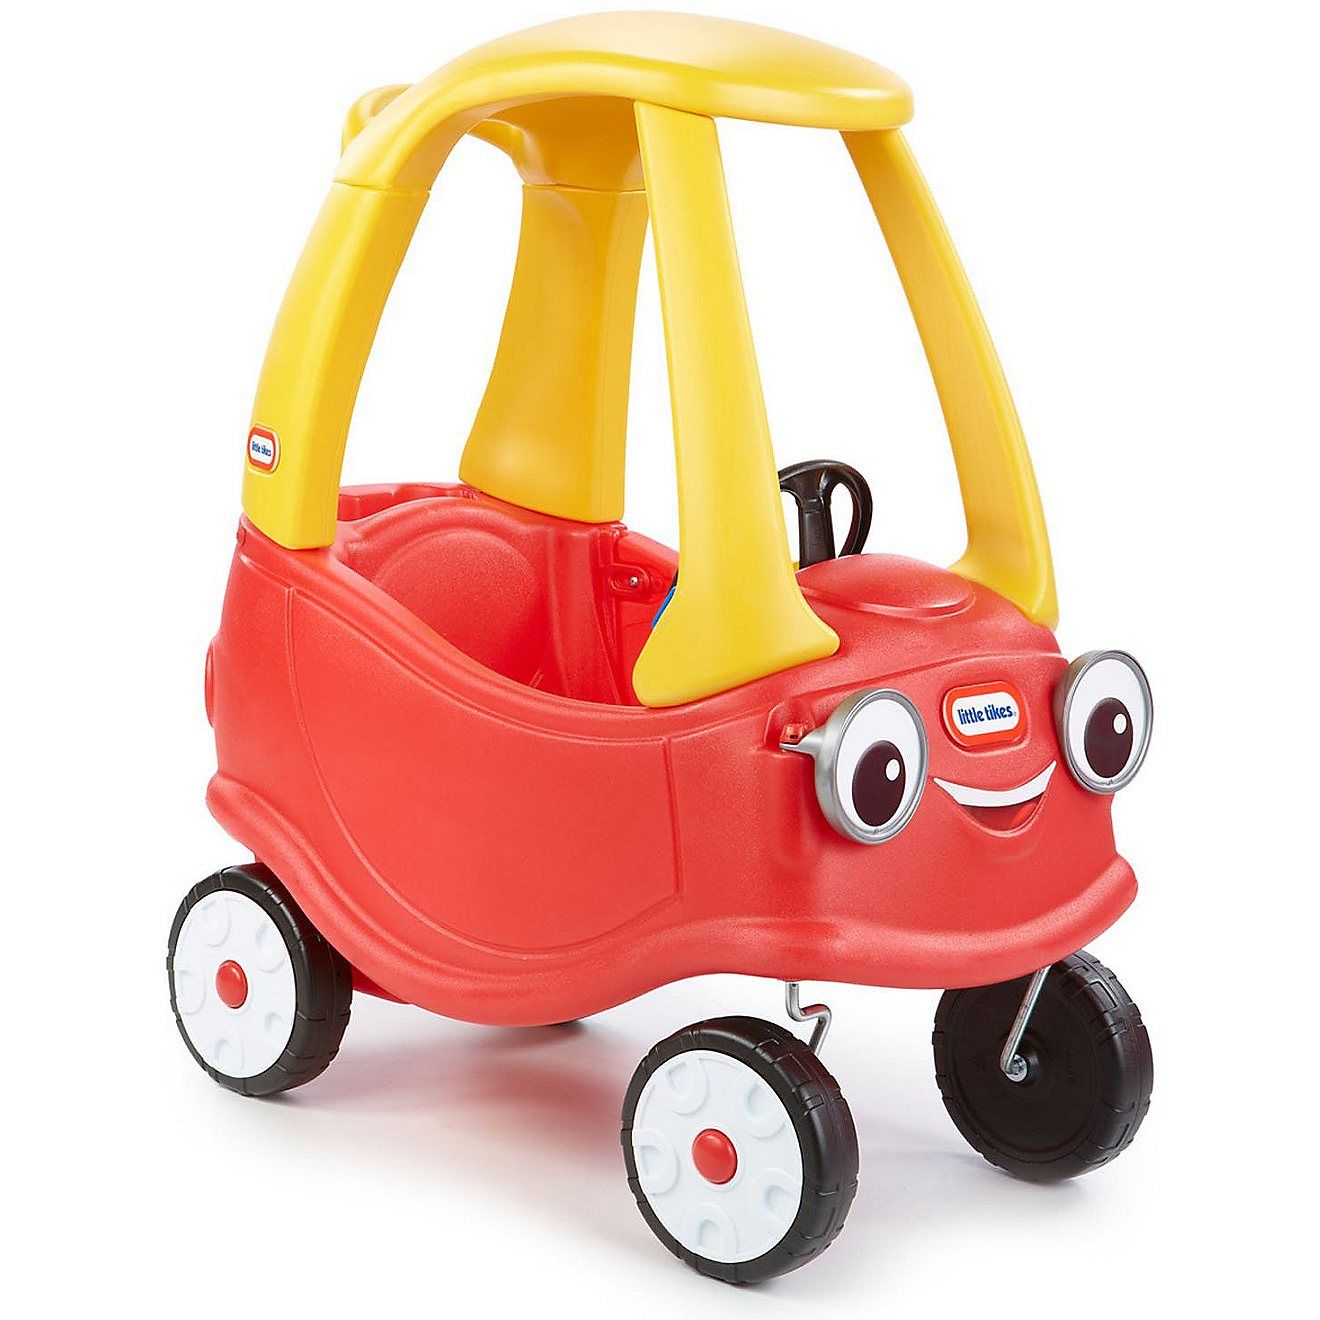 Little Tikes Cozy Coupe Ride-On Toy | Academy Sports + Outdoor Affiliate